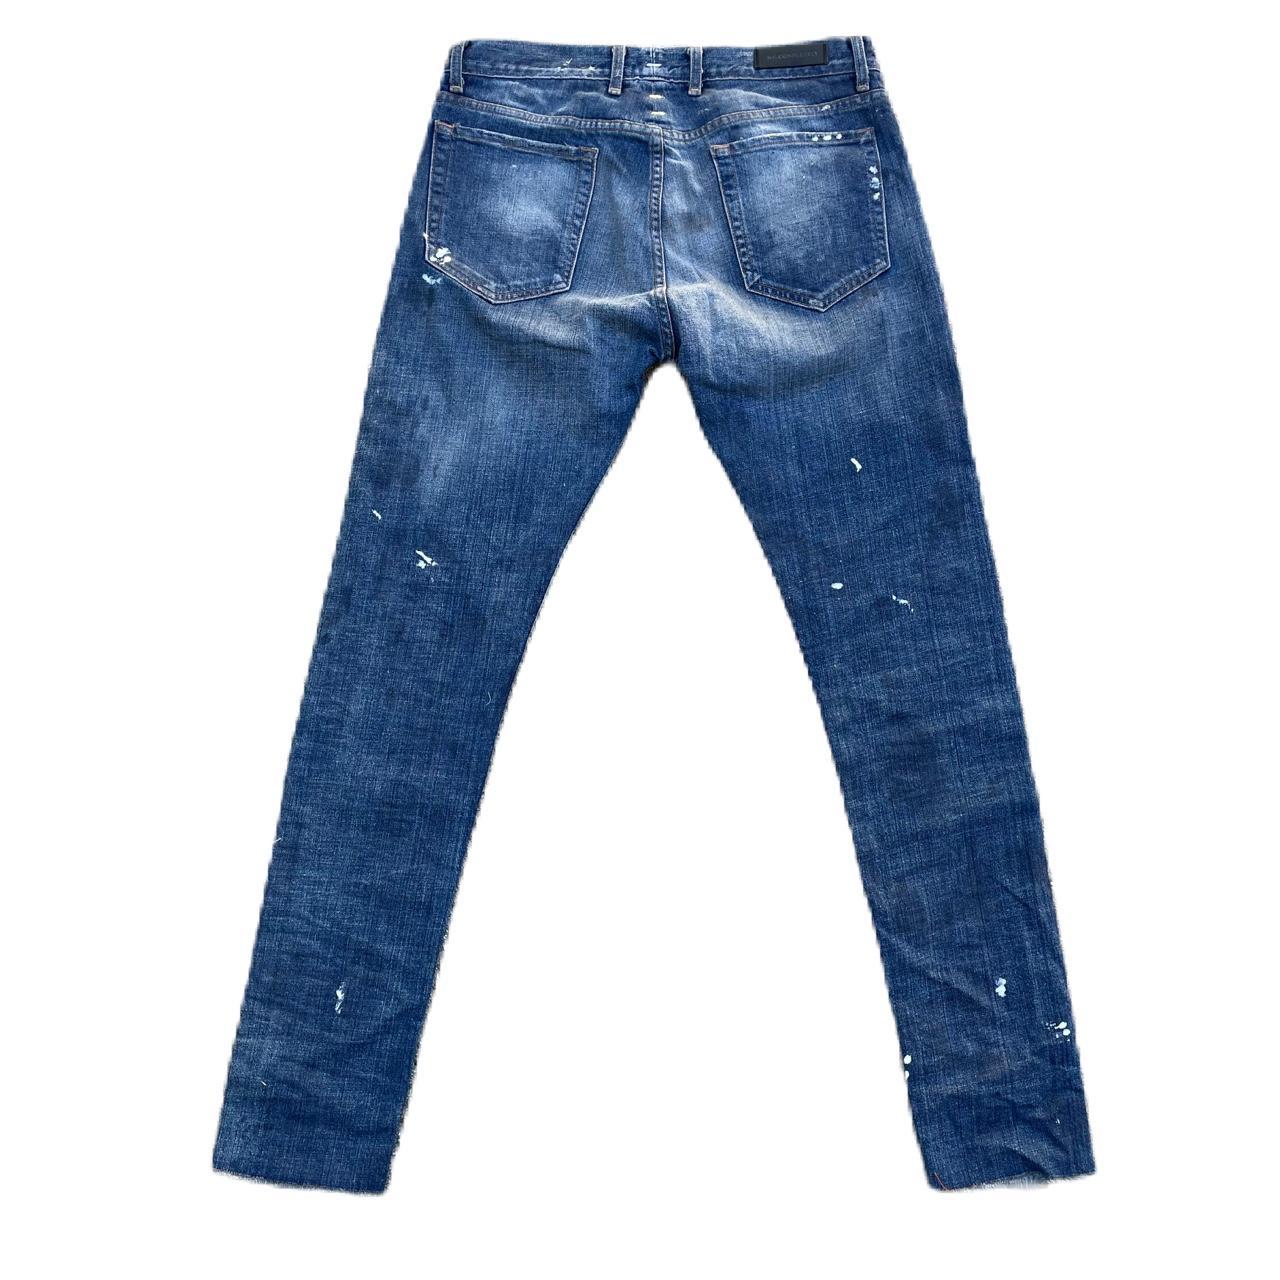 Mr.Completely Men's Blue and White Jeans (4)